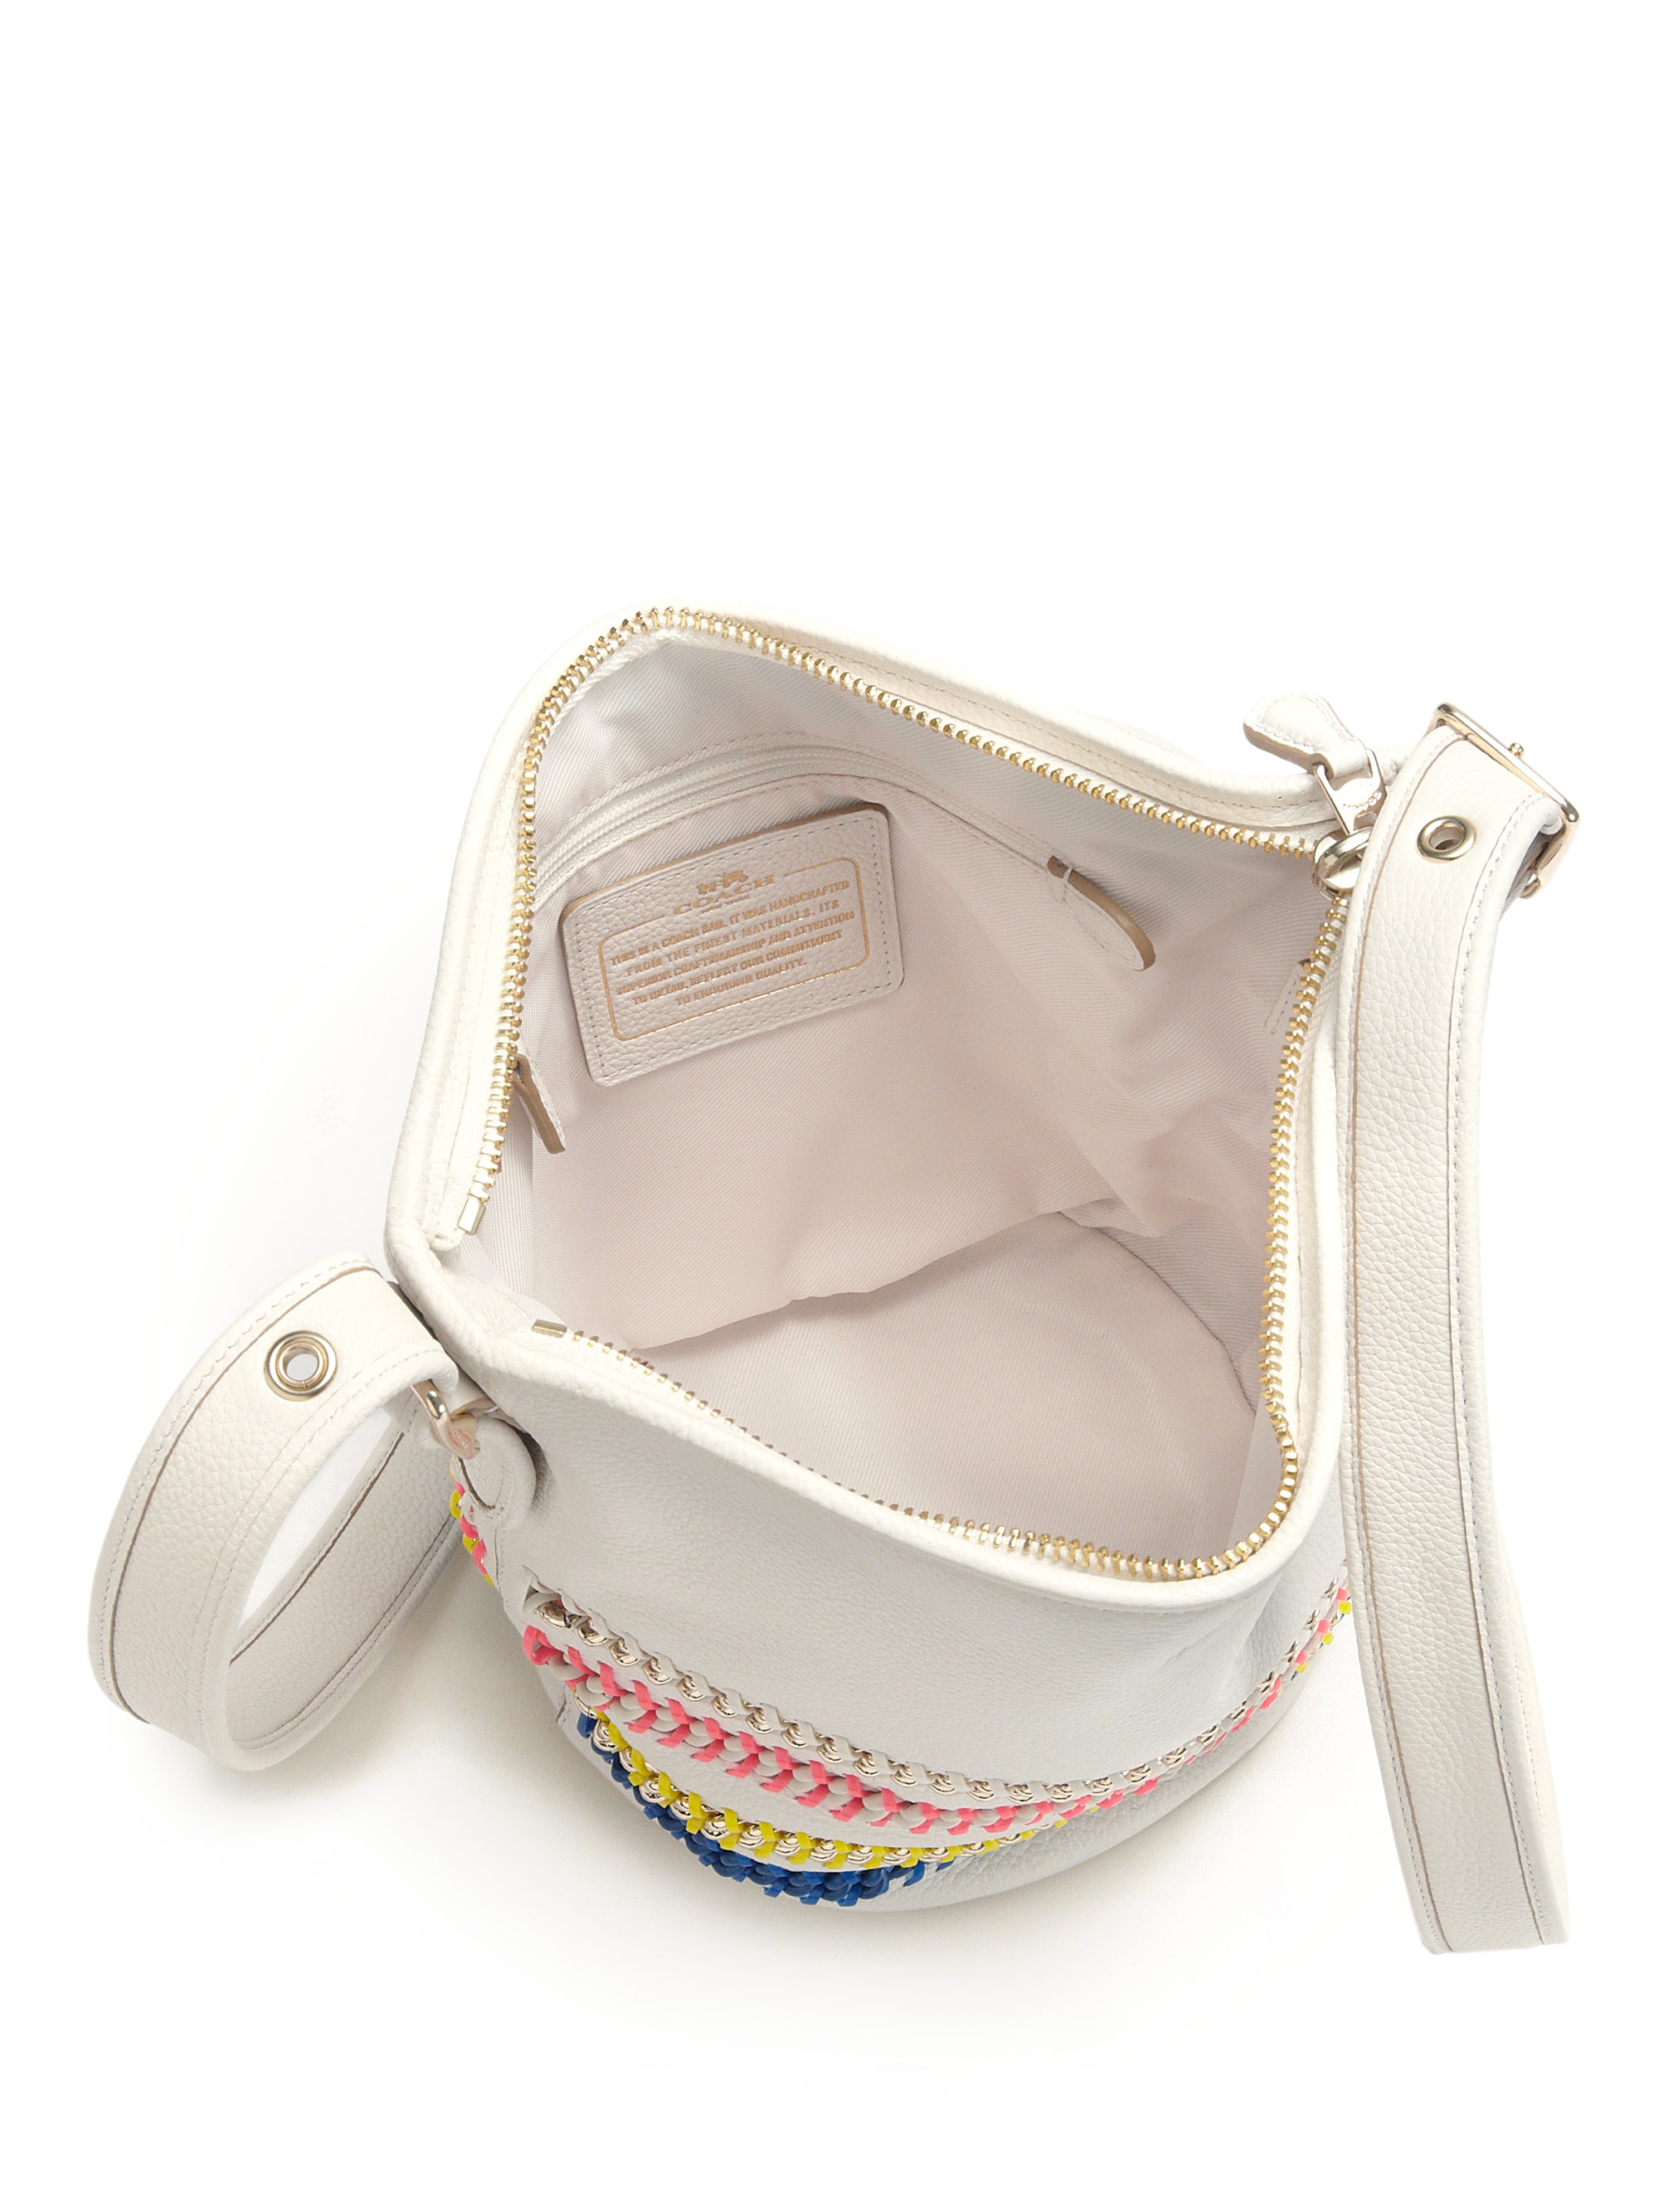 Lyst - Coach Mini Multicolor Whipstitched & Chain-Accented Crossbody Bag in White